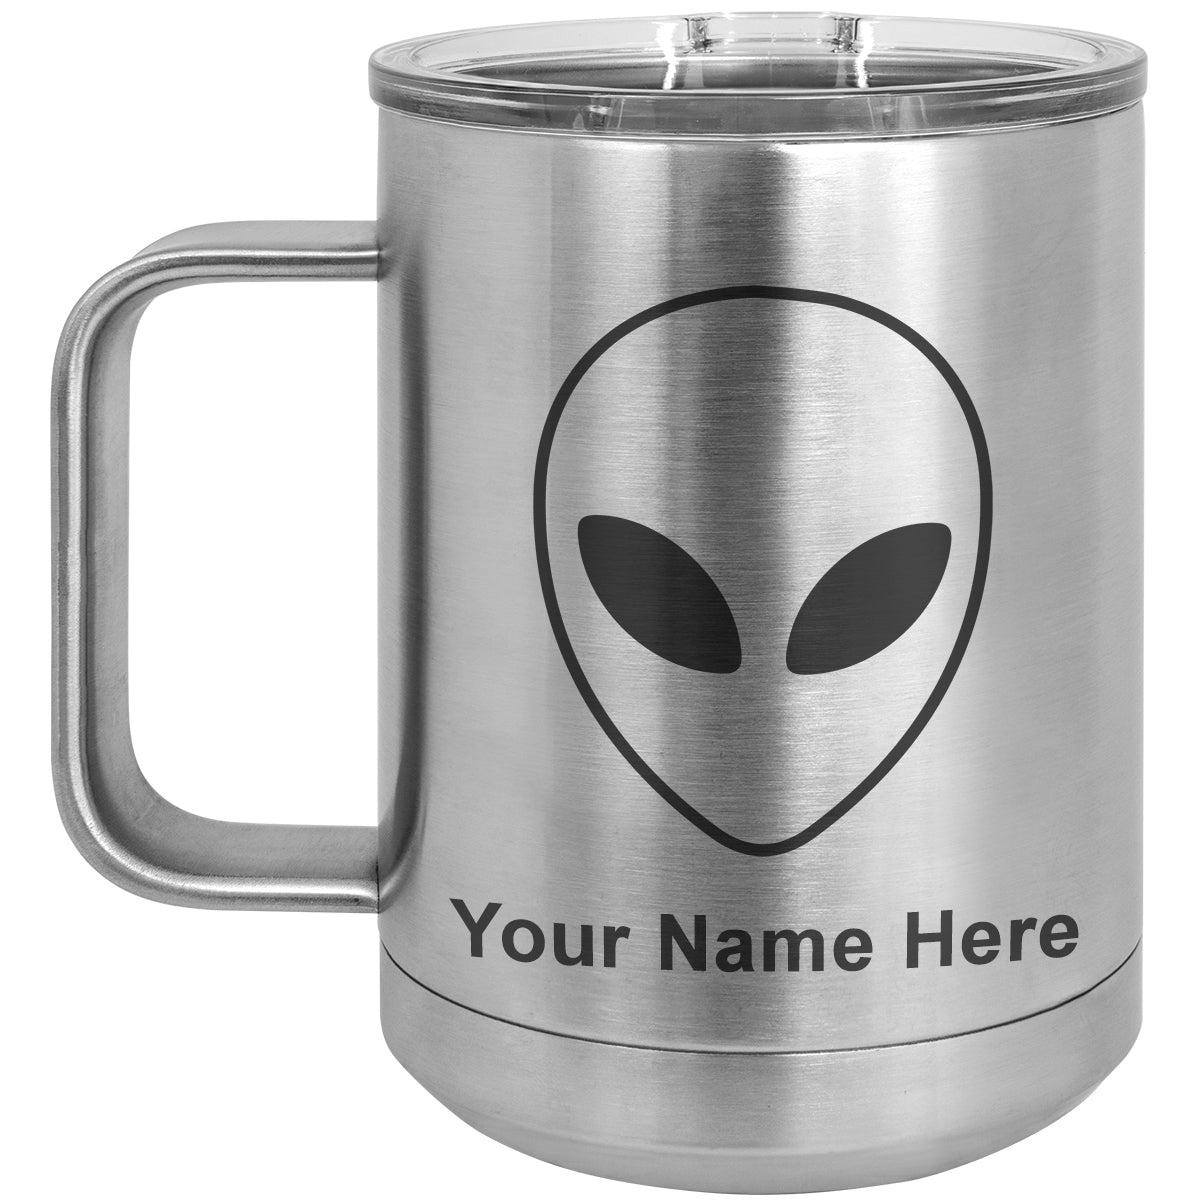 15oz Vacuum Insulated Coffee Mug, Alien Head, Personalized Engraving Included